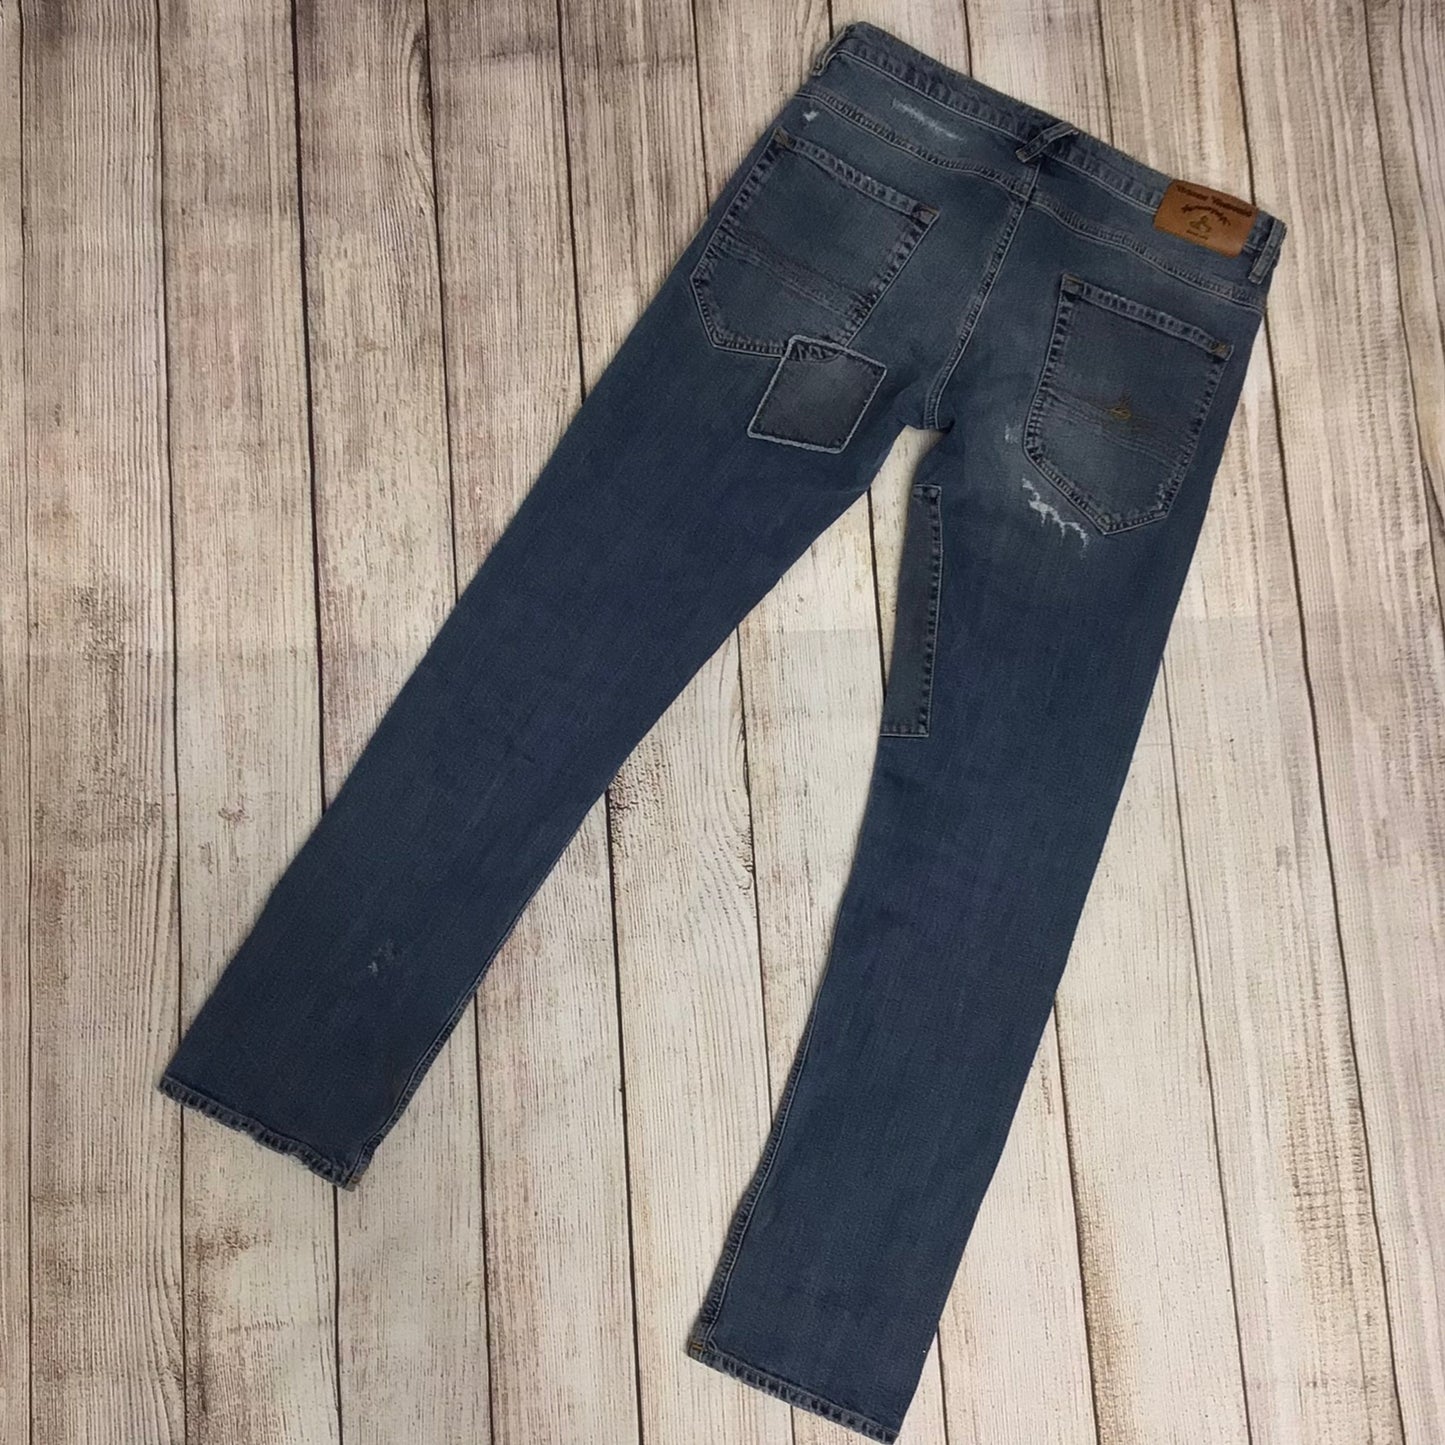 Vivienne Westwood Anglomania Blue Jeans w/Patches Size M (size 30 on label)